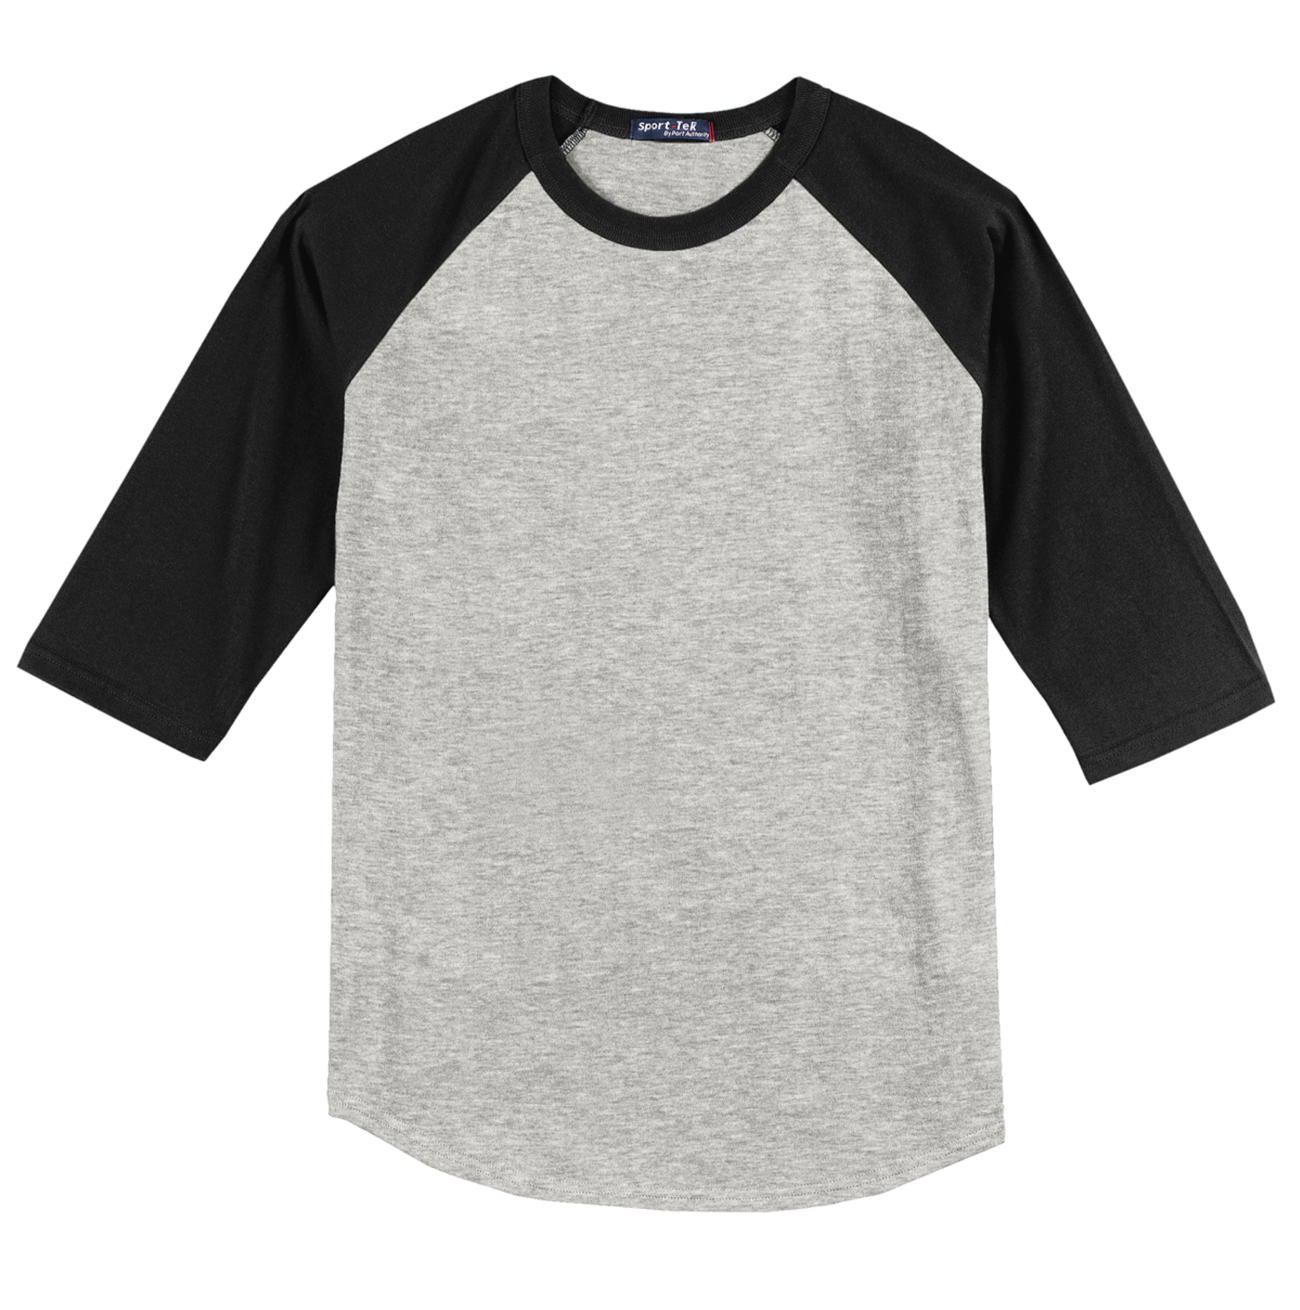 Mary Hill - Integrated Services 3/4 Sleeve T-Shirt